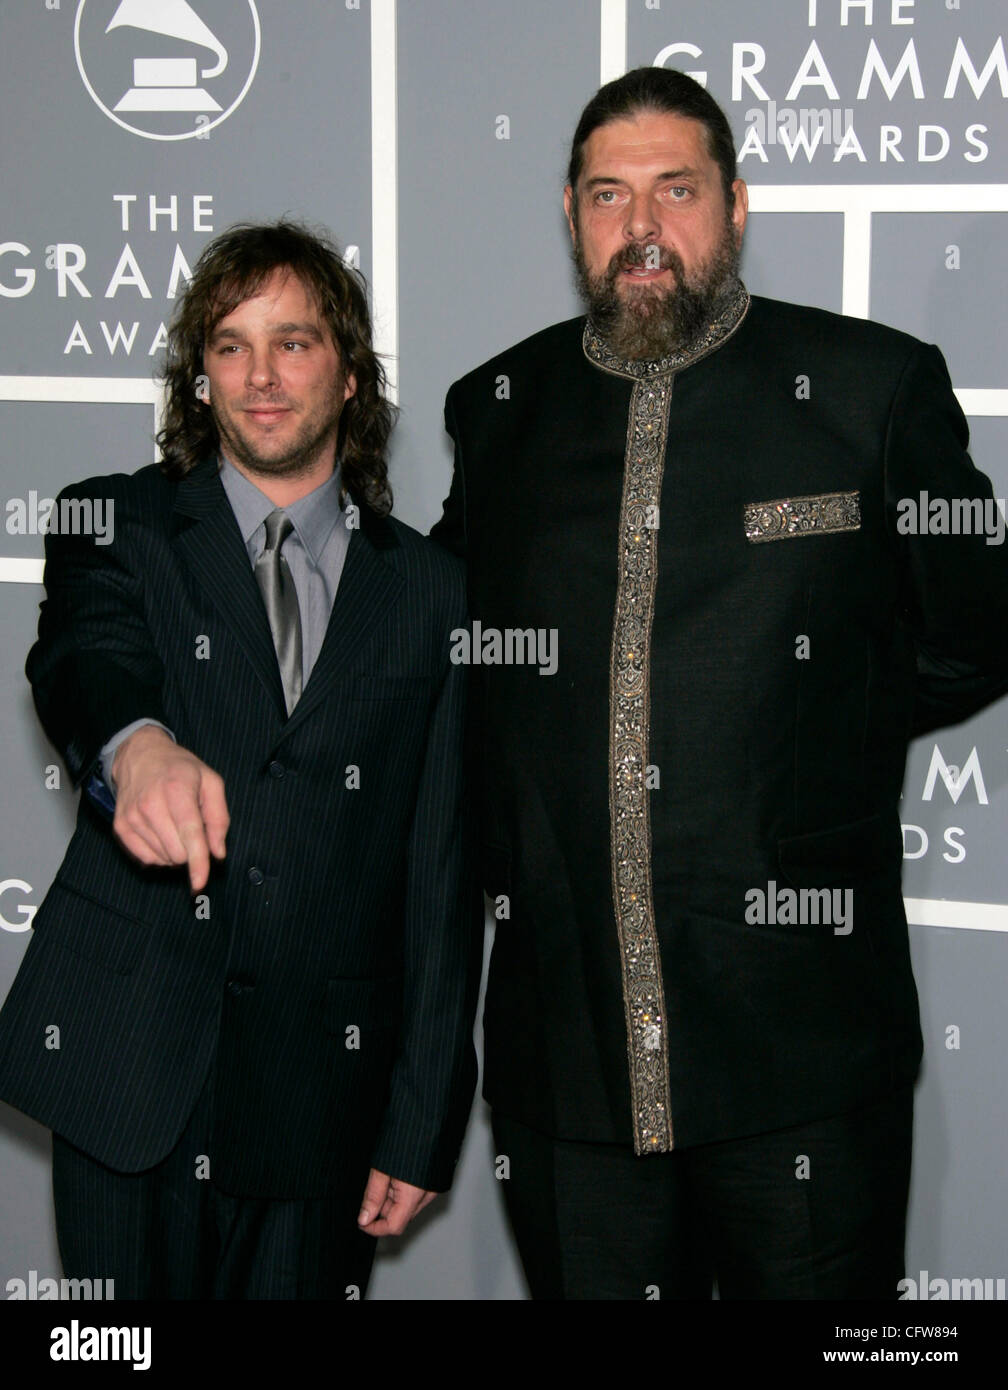 Feb 11, 2007; Los Angeles, CA, USA; GRAMMYS 2007: ALAN PARSONS PROJECT arriving at the 49th Annual Grammy Awards held at Staples Center in Los Angeles. Mandatory Credit: Photo by Lisa O'Connor/ZUMA Press. (©) Copyright 2007 by Lisa O'Connor Stock Photo